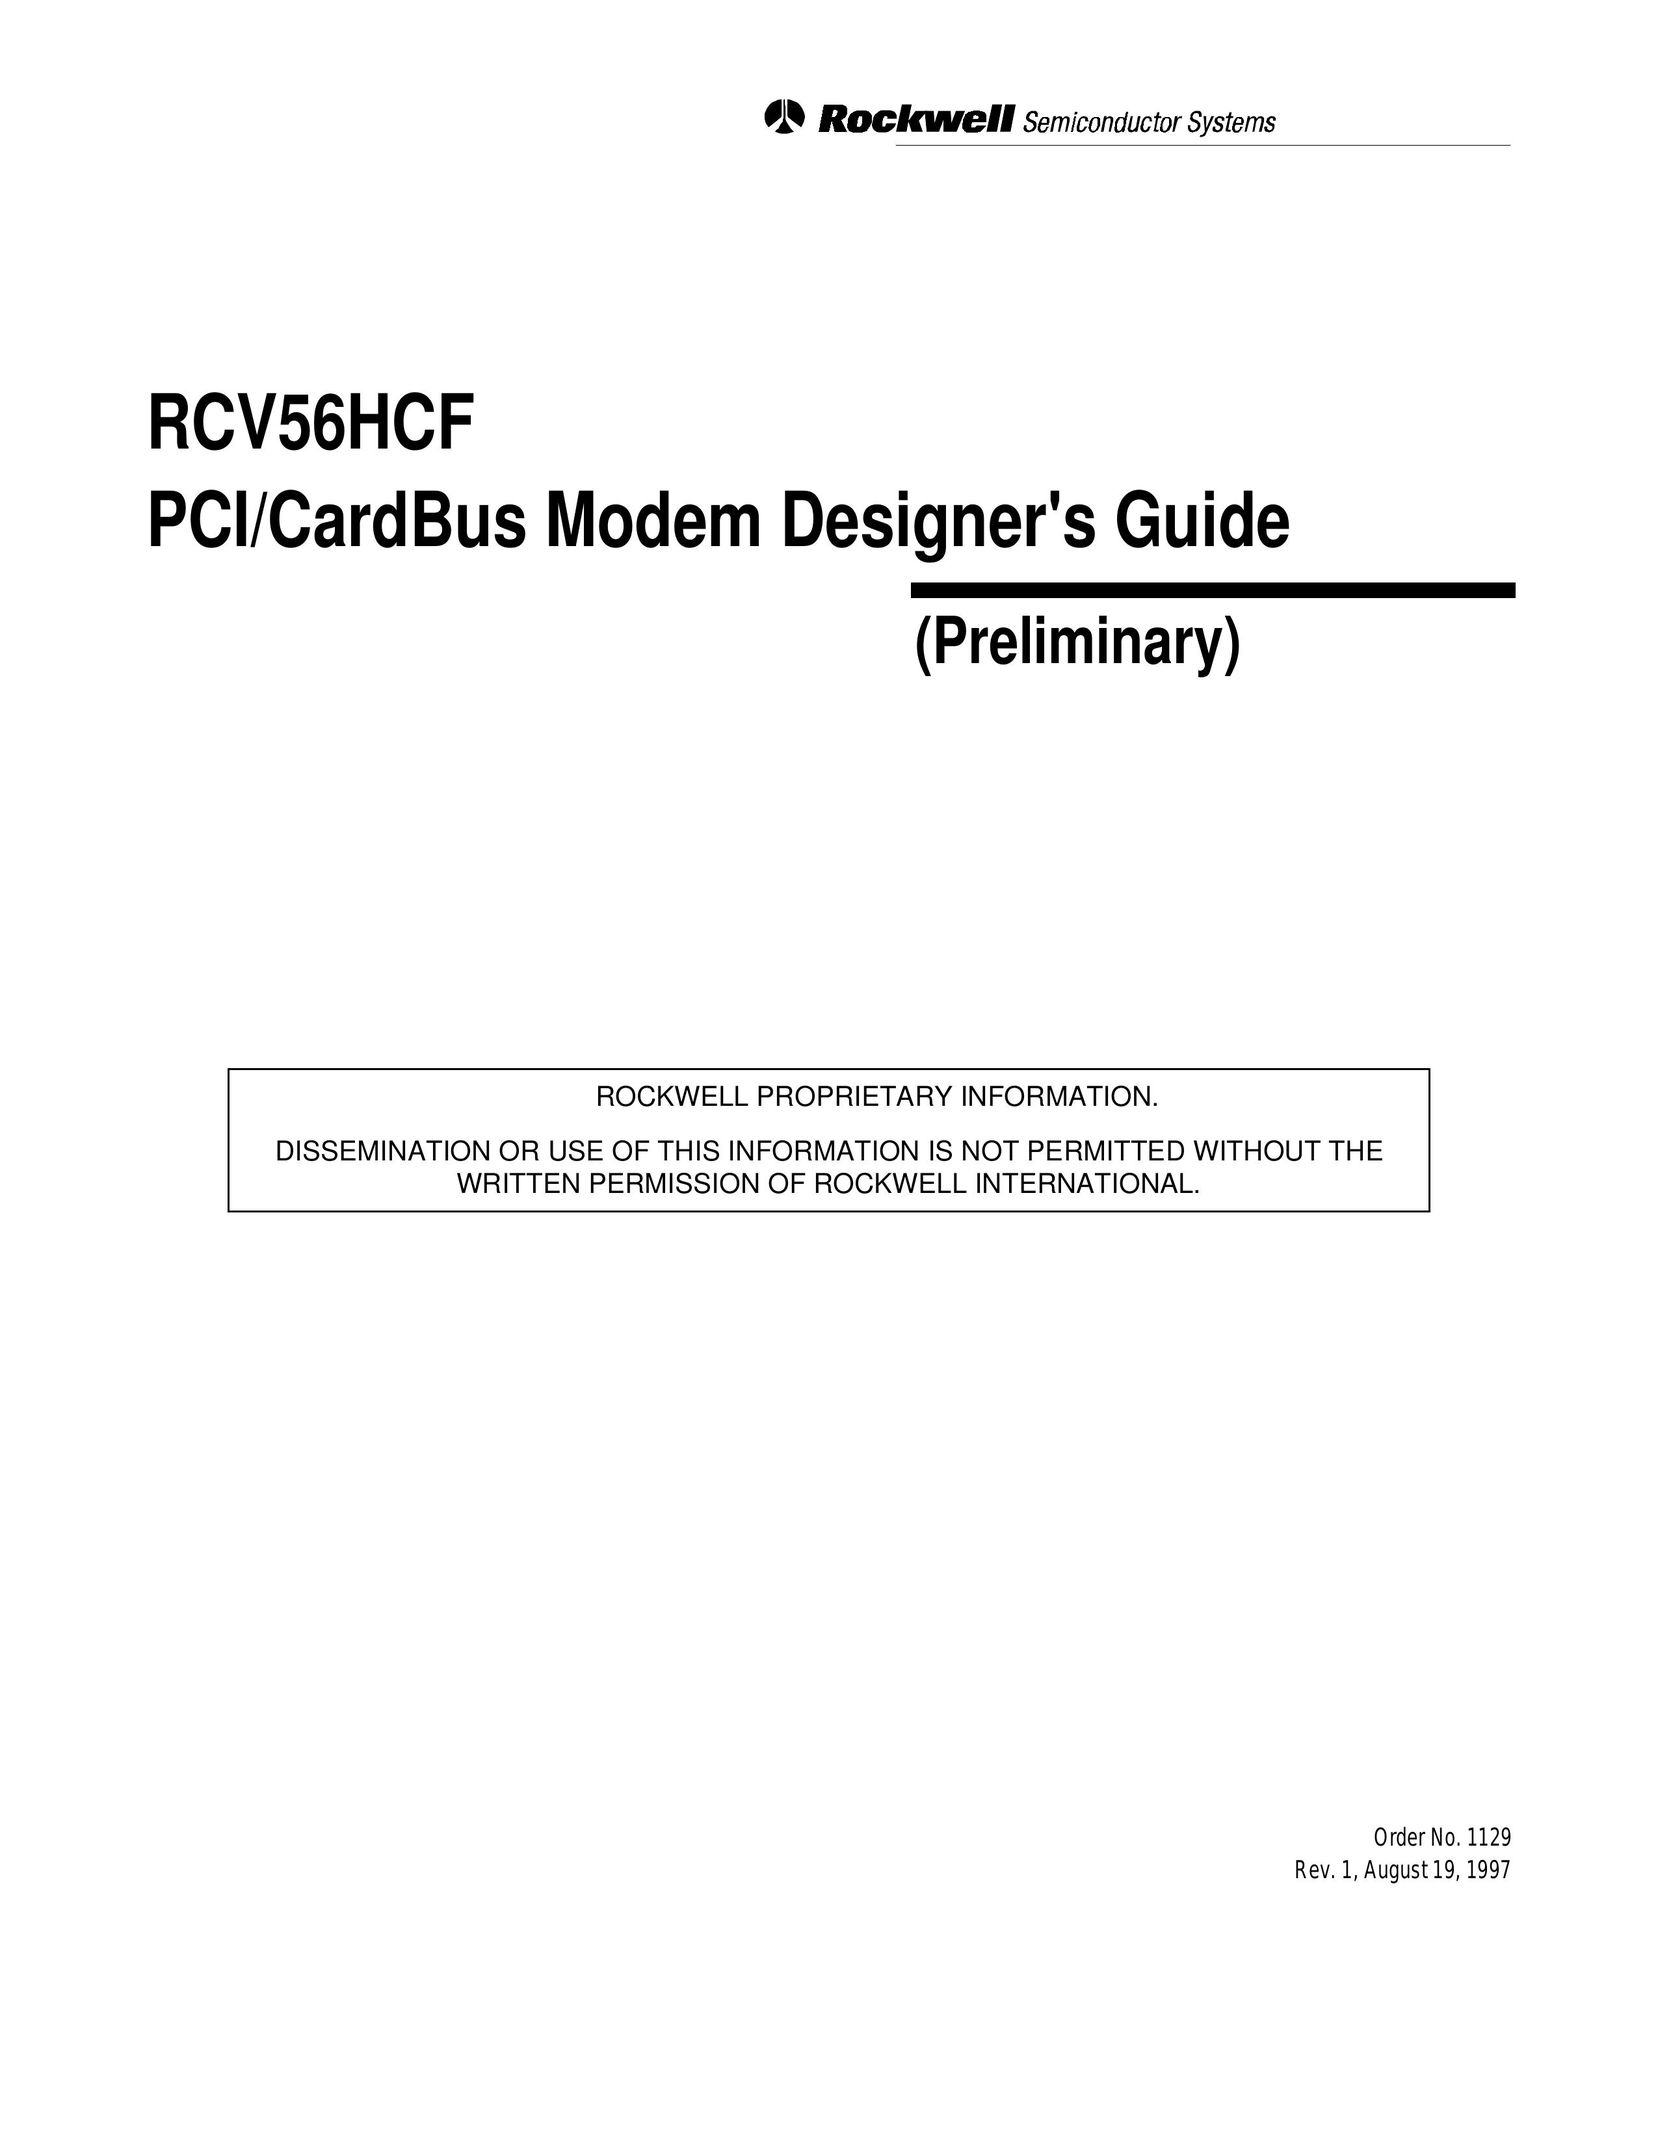 Hayes Microcomputer Products RCV56HCF Network Card User Manual